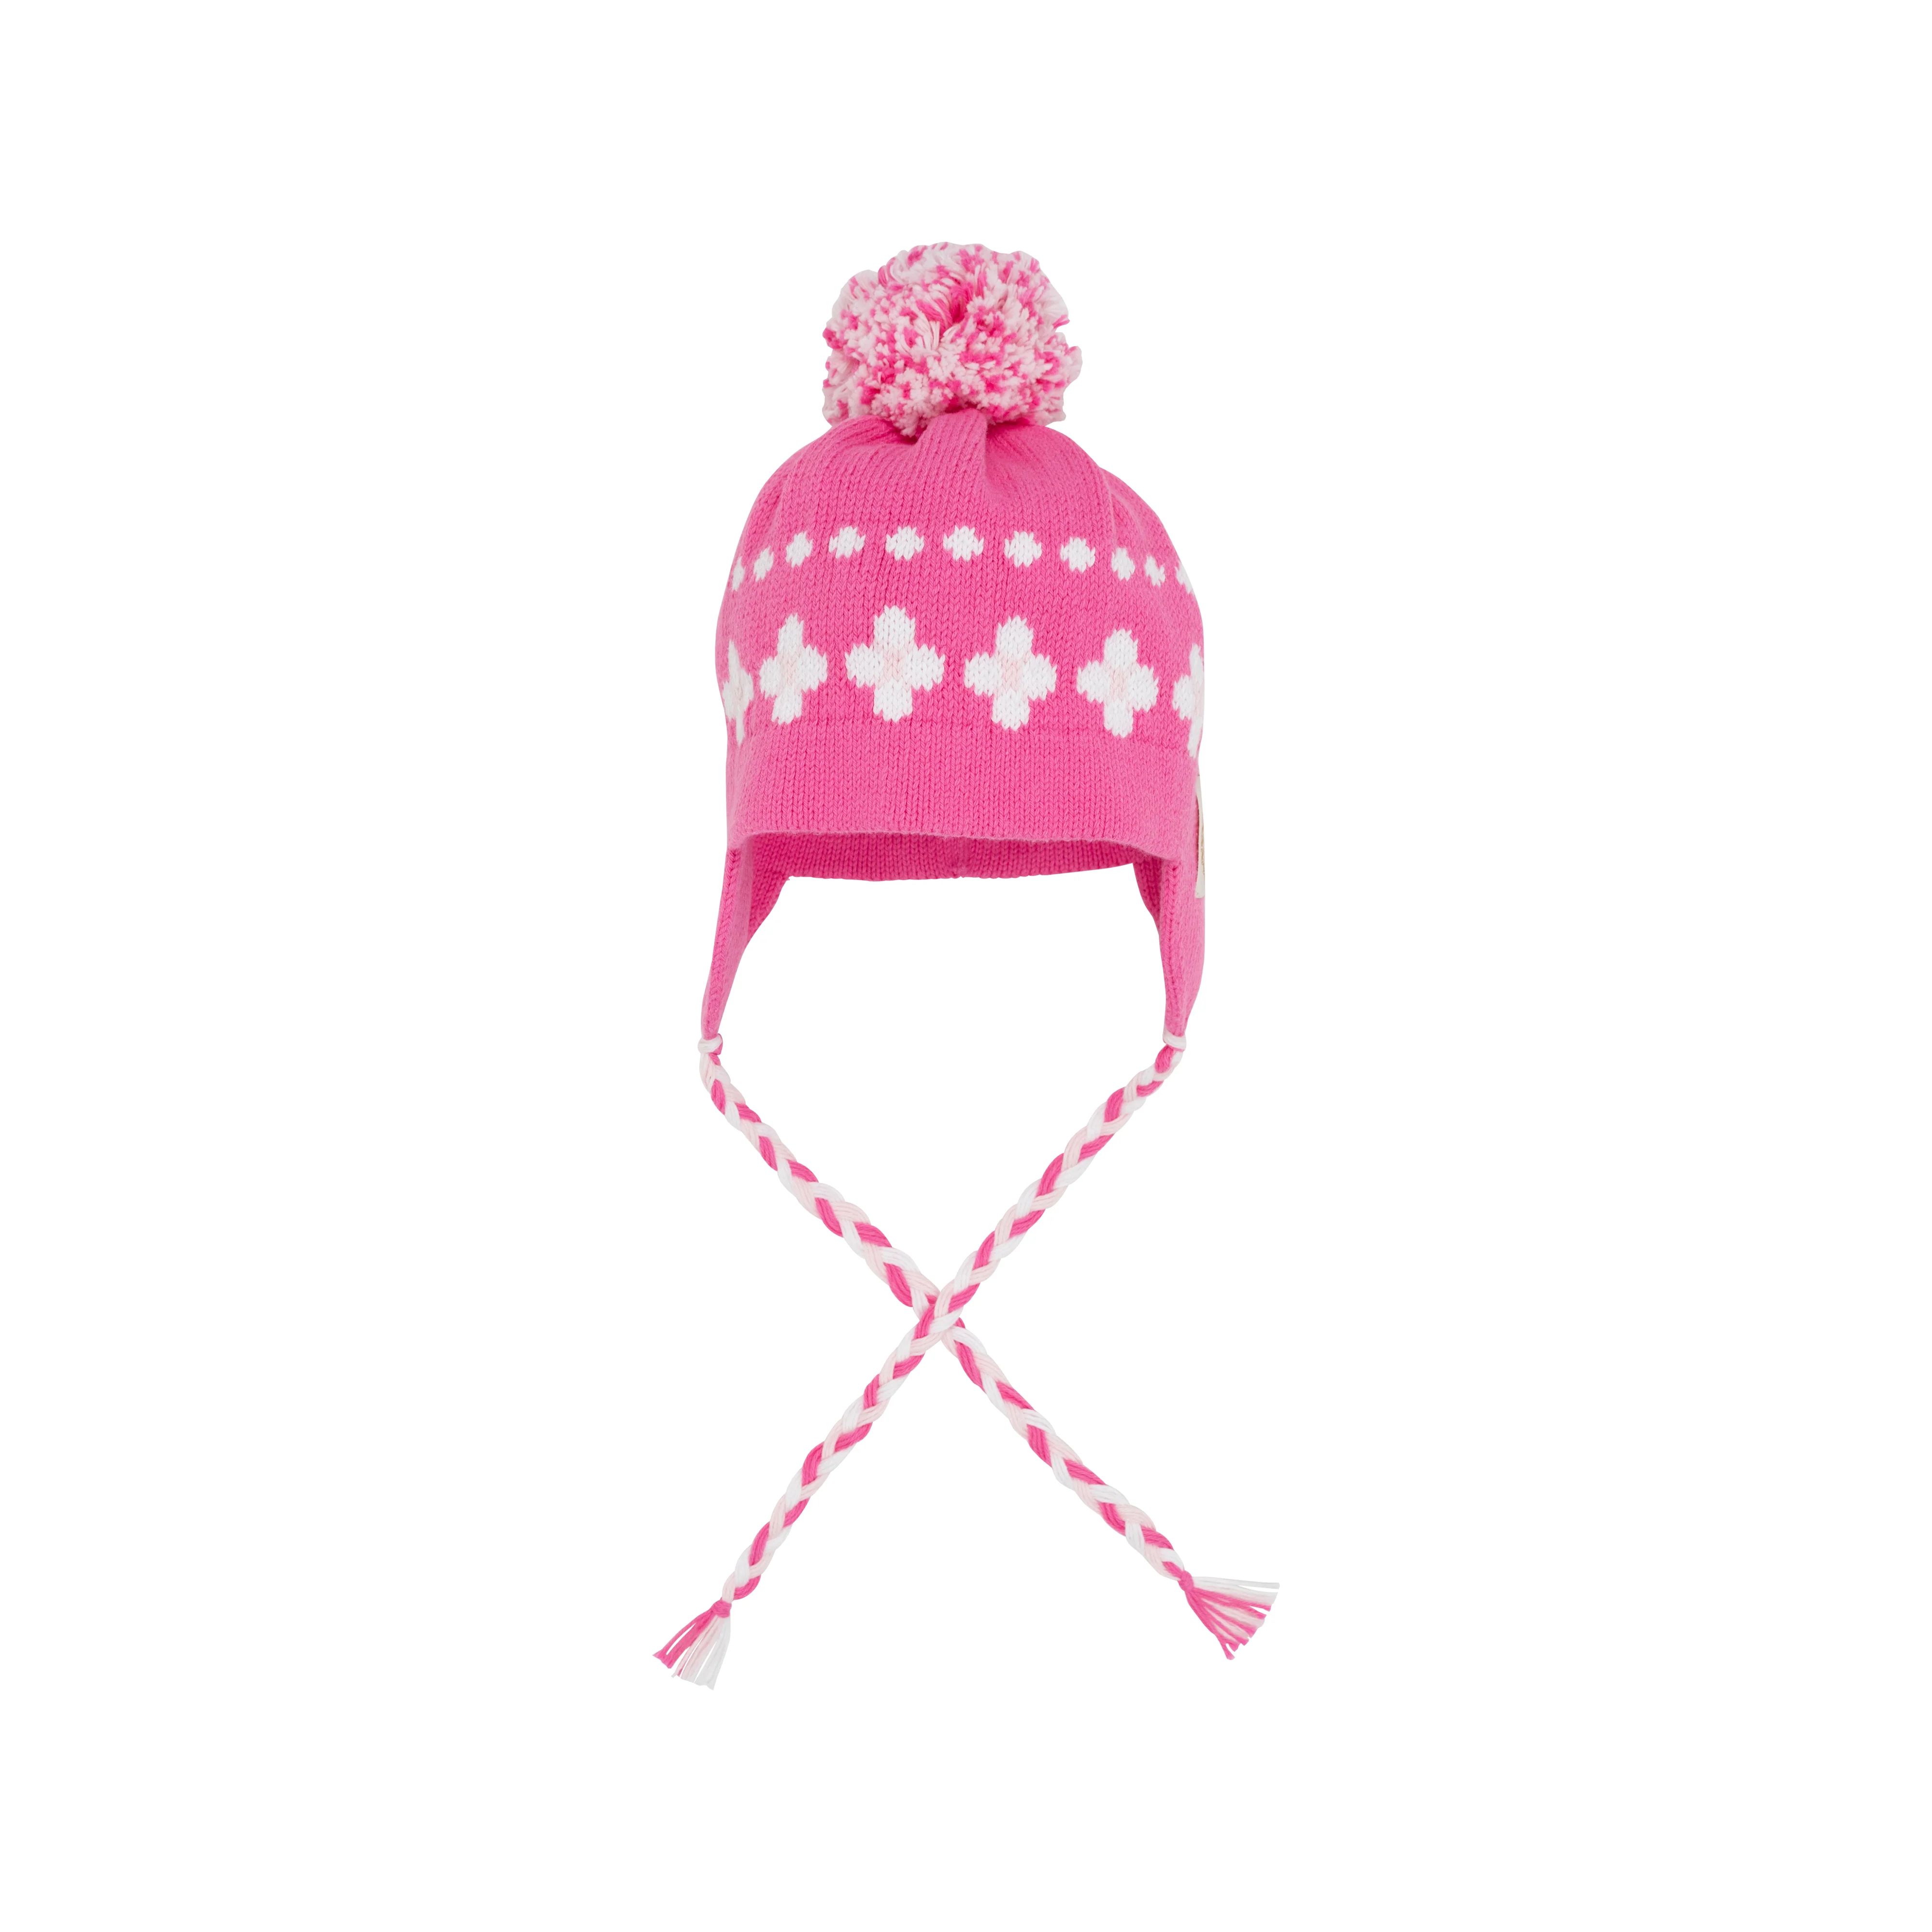 Parrish Pom Pom Hat - Hamptons Hot Pink with Worth Avenue White Dots | The Beaufort Bonnet Company